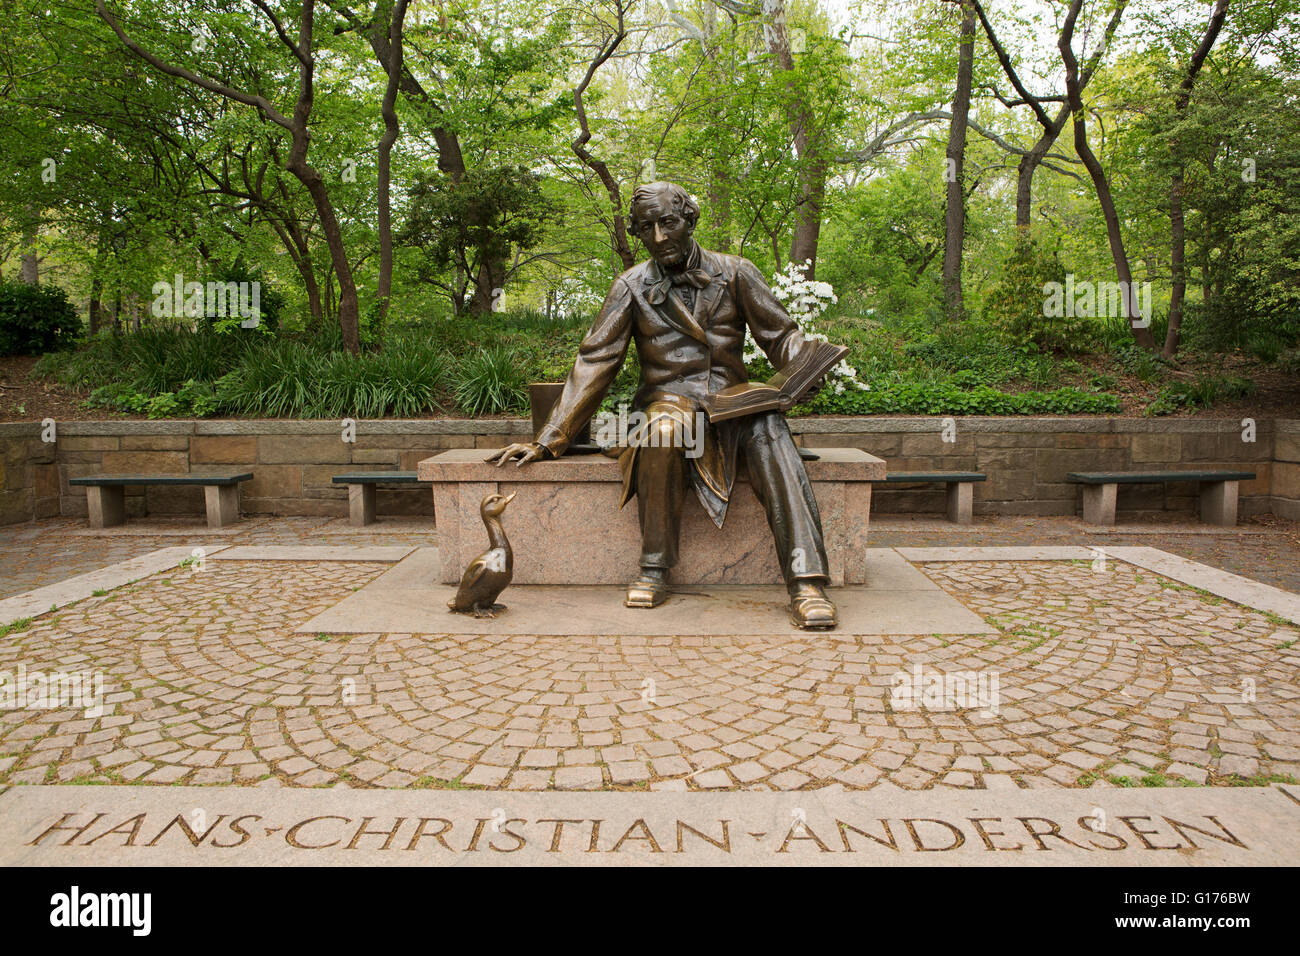 Statue of Hans Christian Andersen at Central Park in New York City, USA